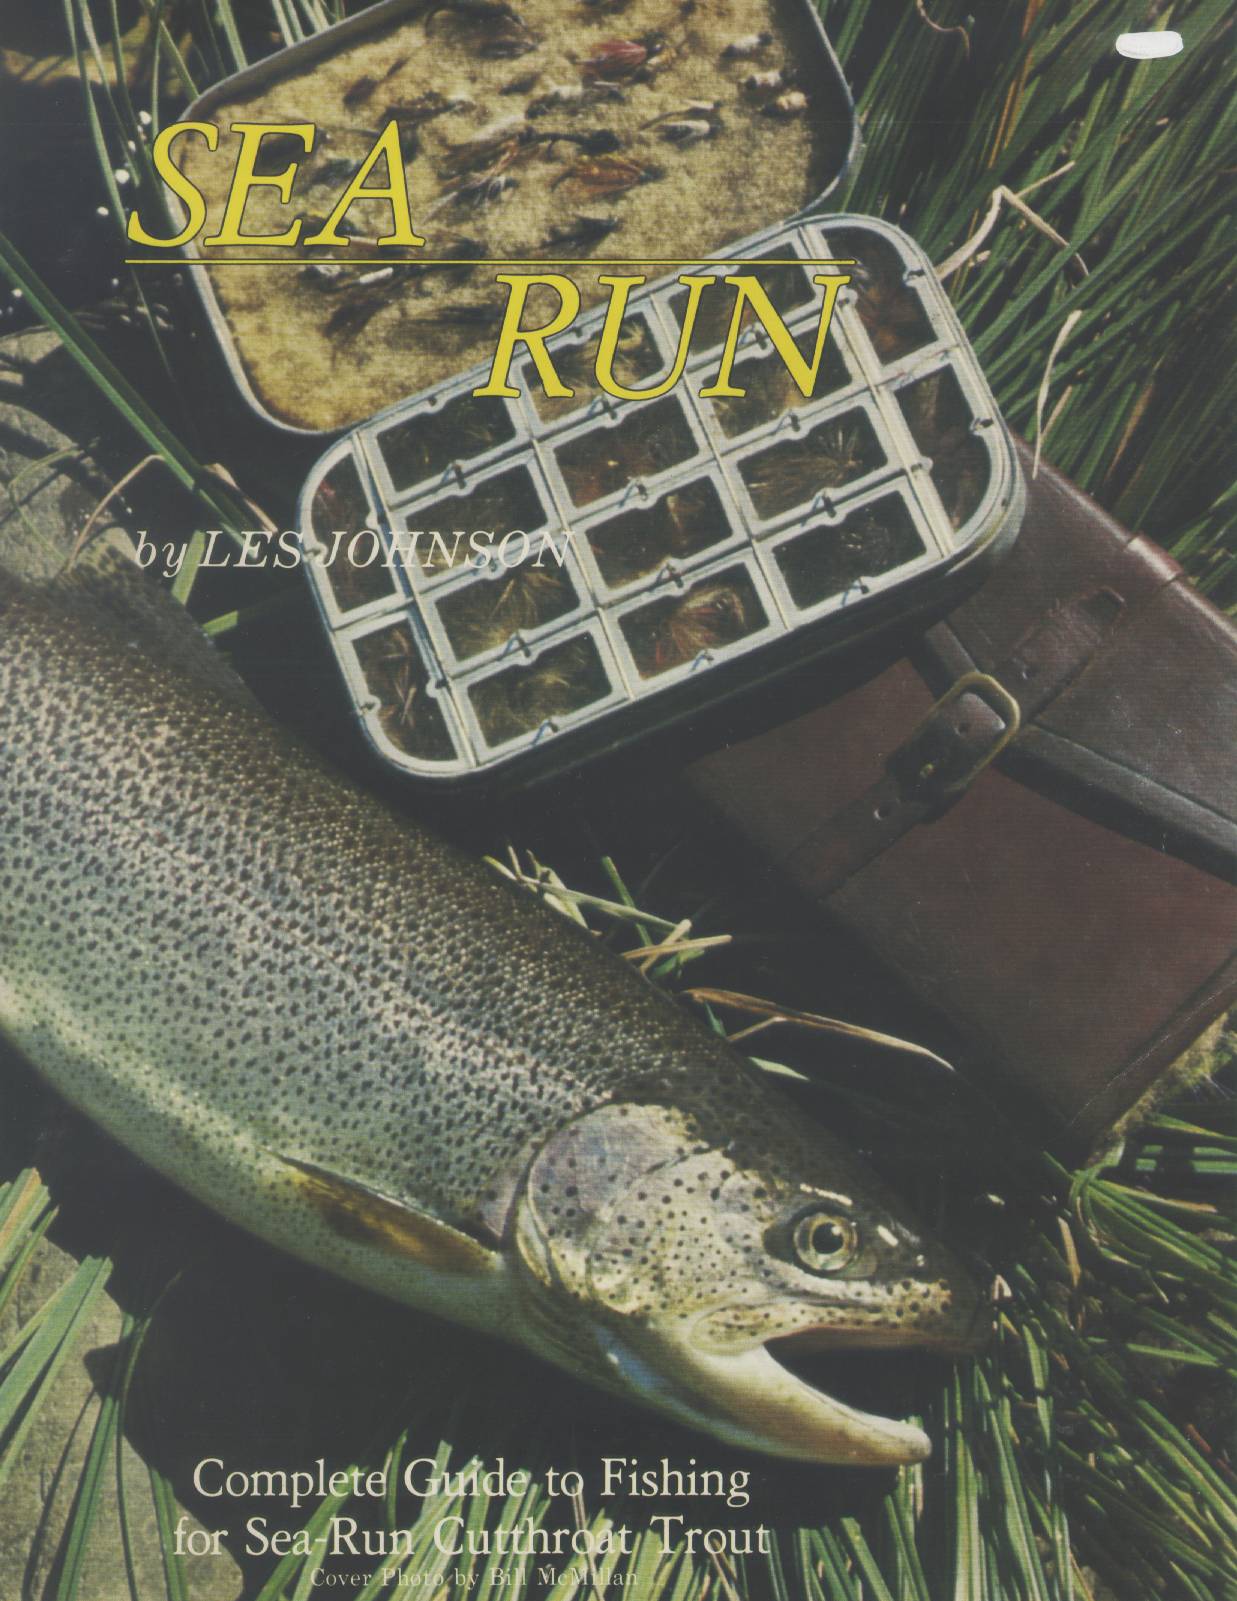 SEA RUN: complete guide to fishing for sea-run cutthroat trout. 